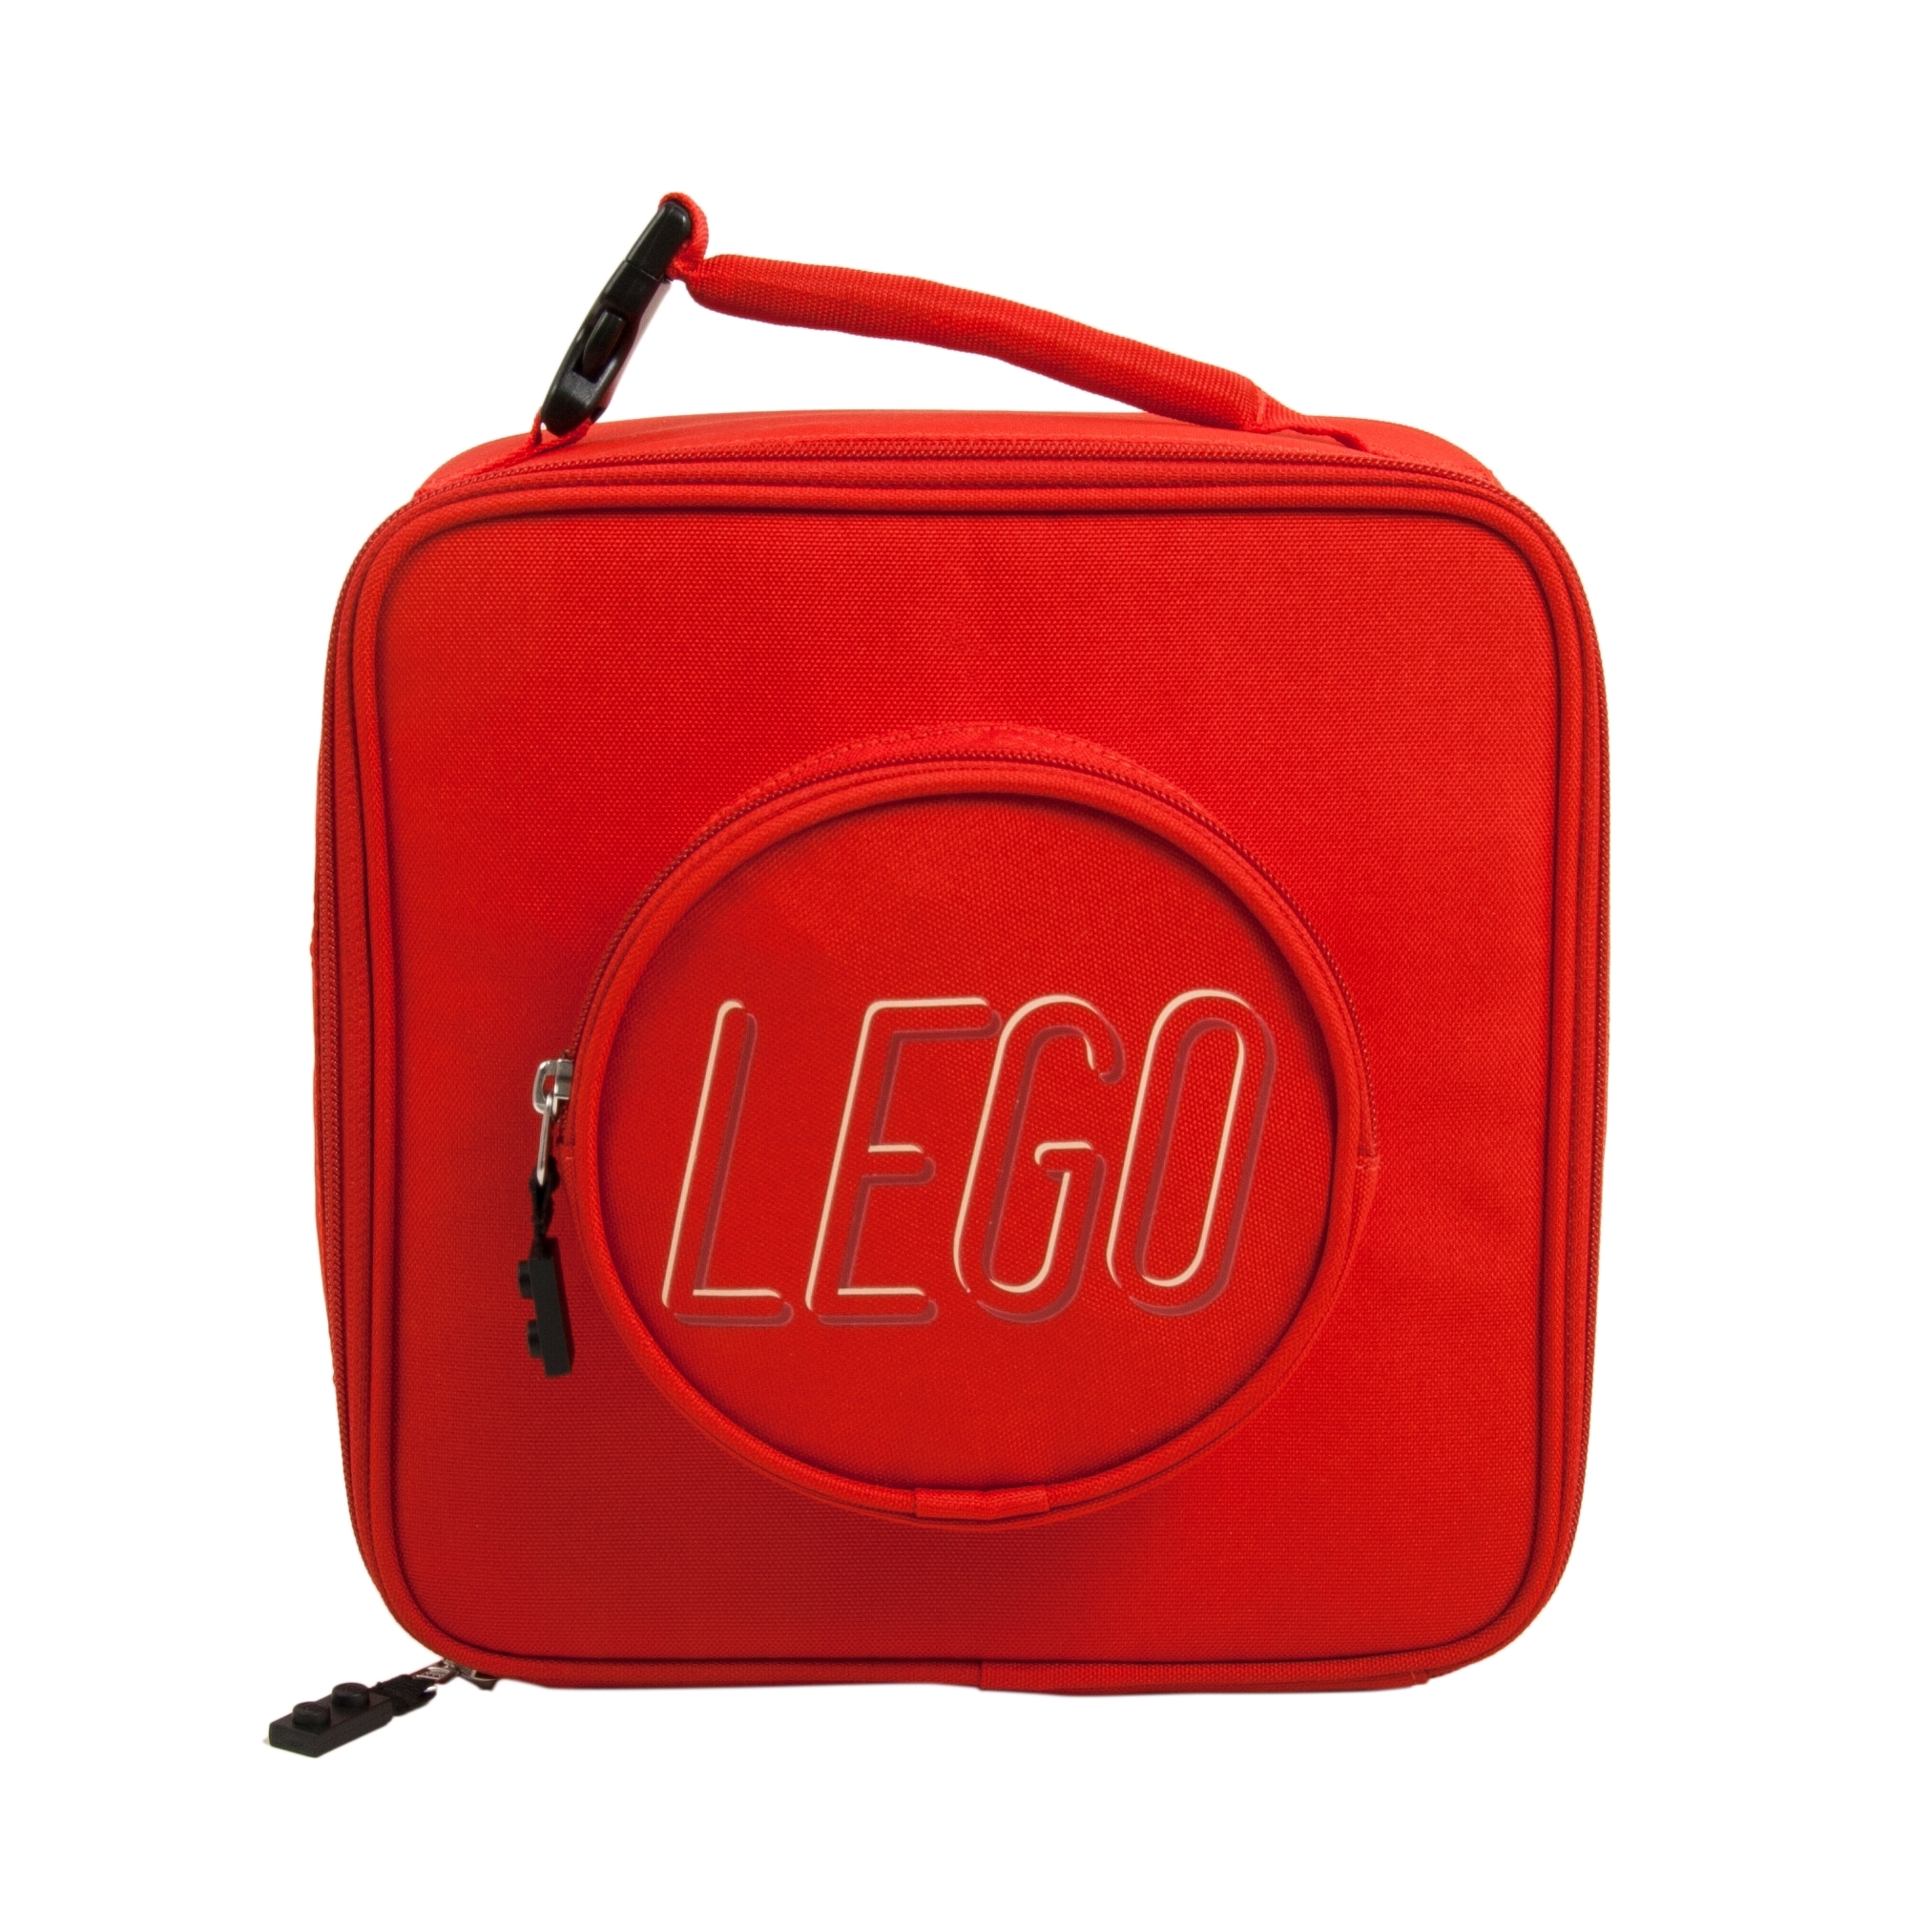 red lunch bag